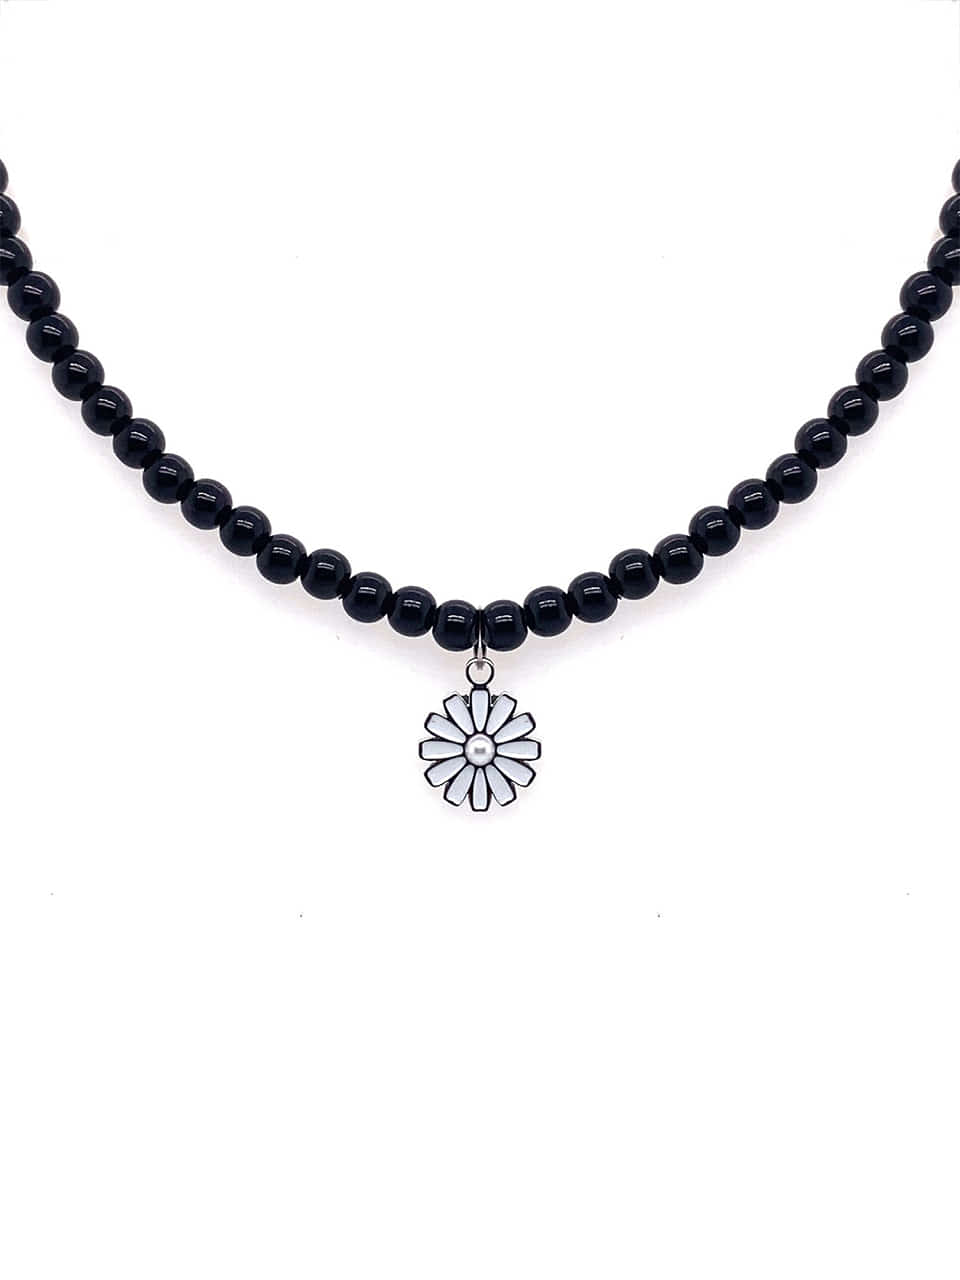 BHS202 Pearl Daisy Black Beads Choker Necklace